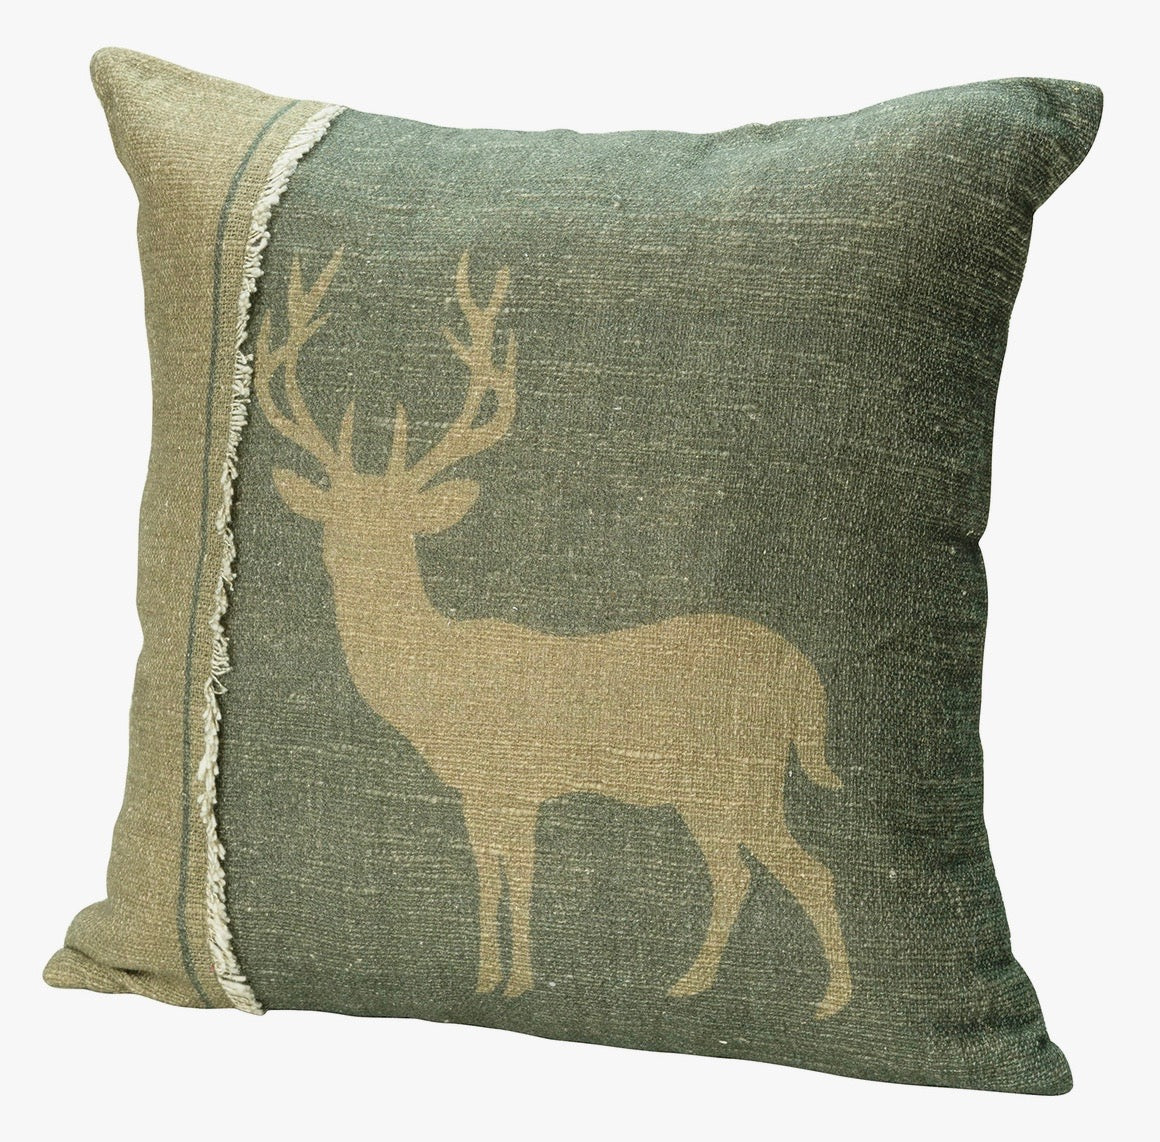 Pillow- Reindeer Olive Colored Pillow